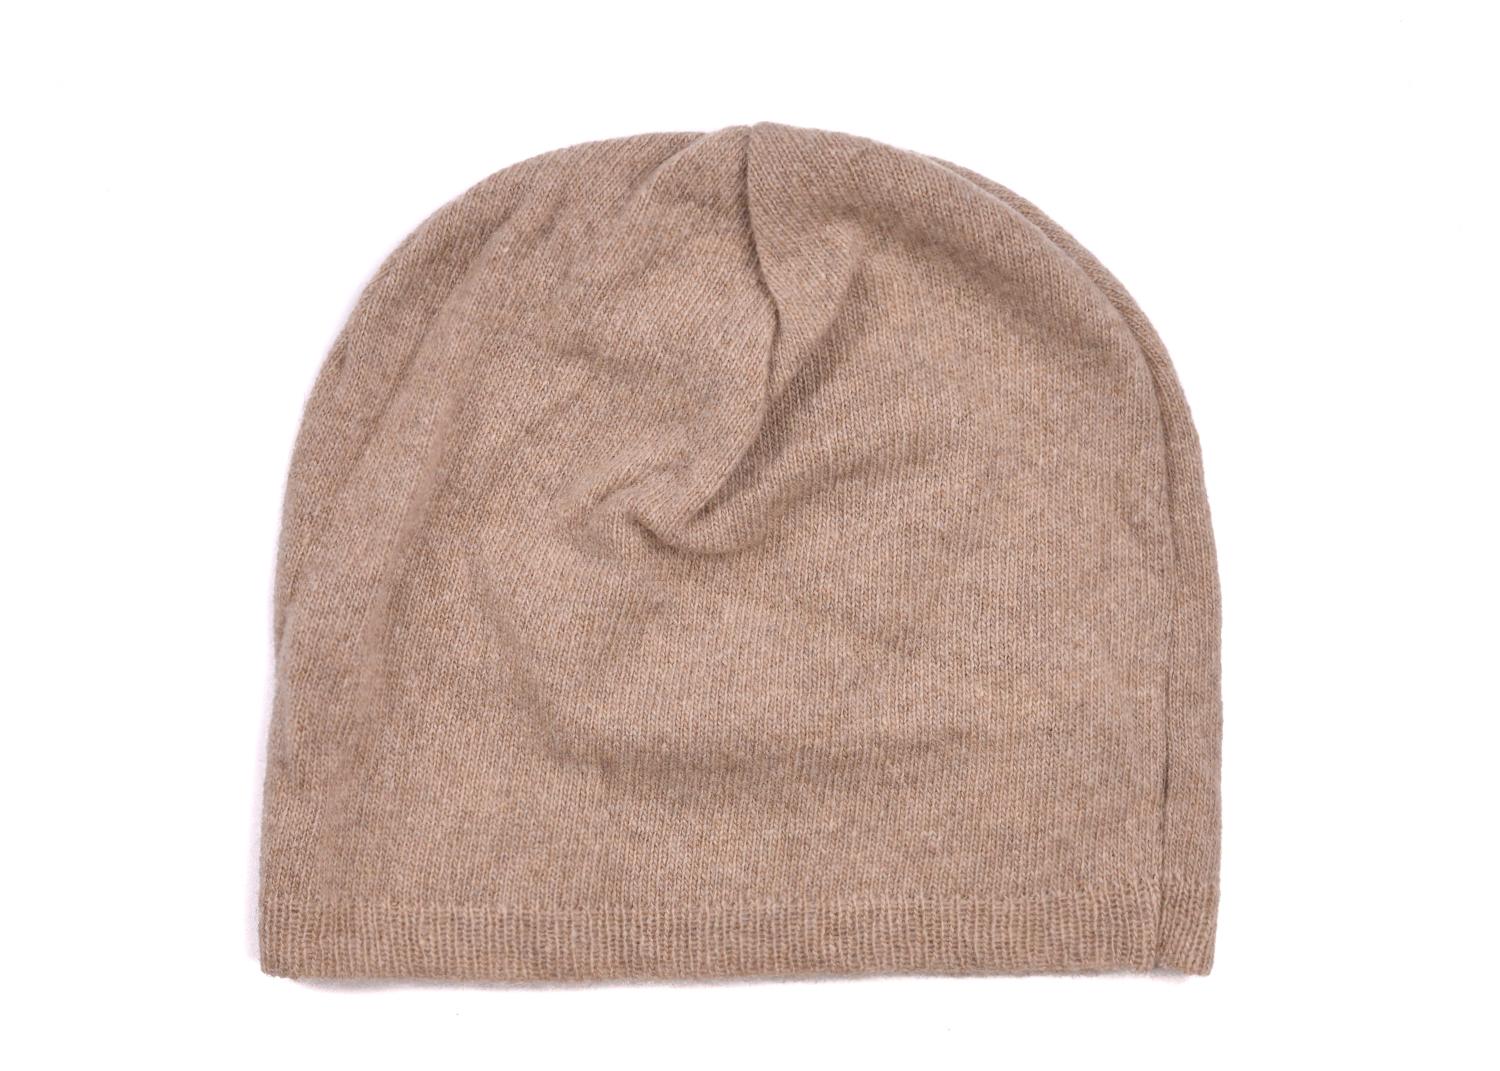 Roberto Cavalli redefines fall chic with your accessories newest cashmere addition. This lofty cosmetic brown hat features a rich knitted cashmere base, reinforced ribbed knit perimeter, and luxe gold RC logo applique. You can pair this fall